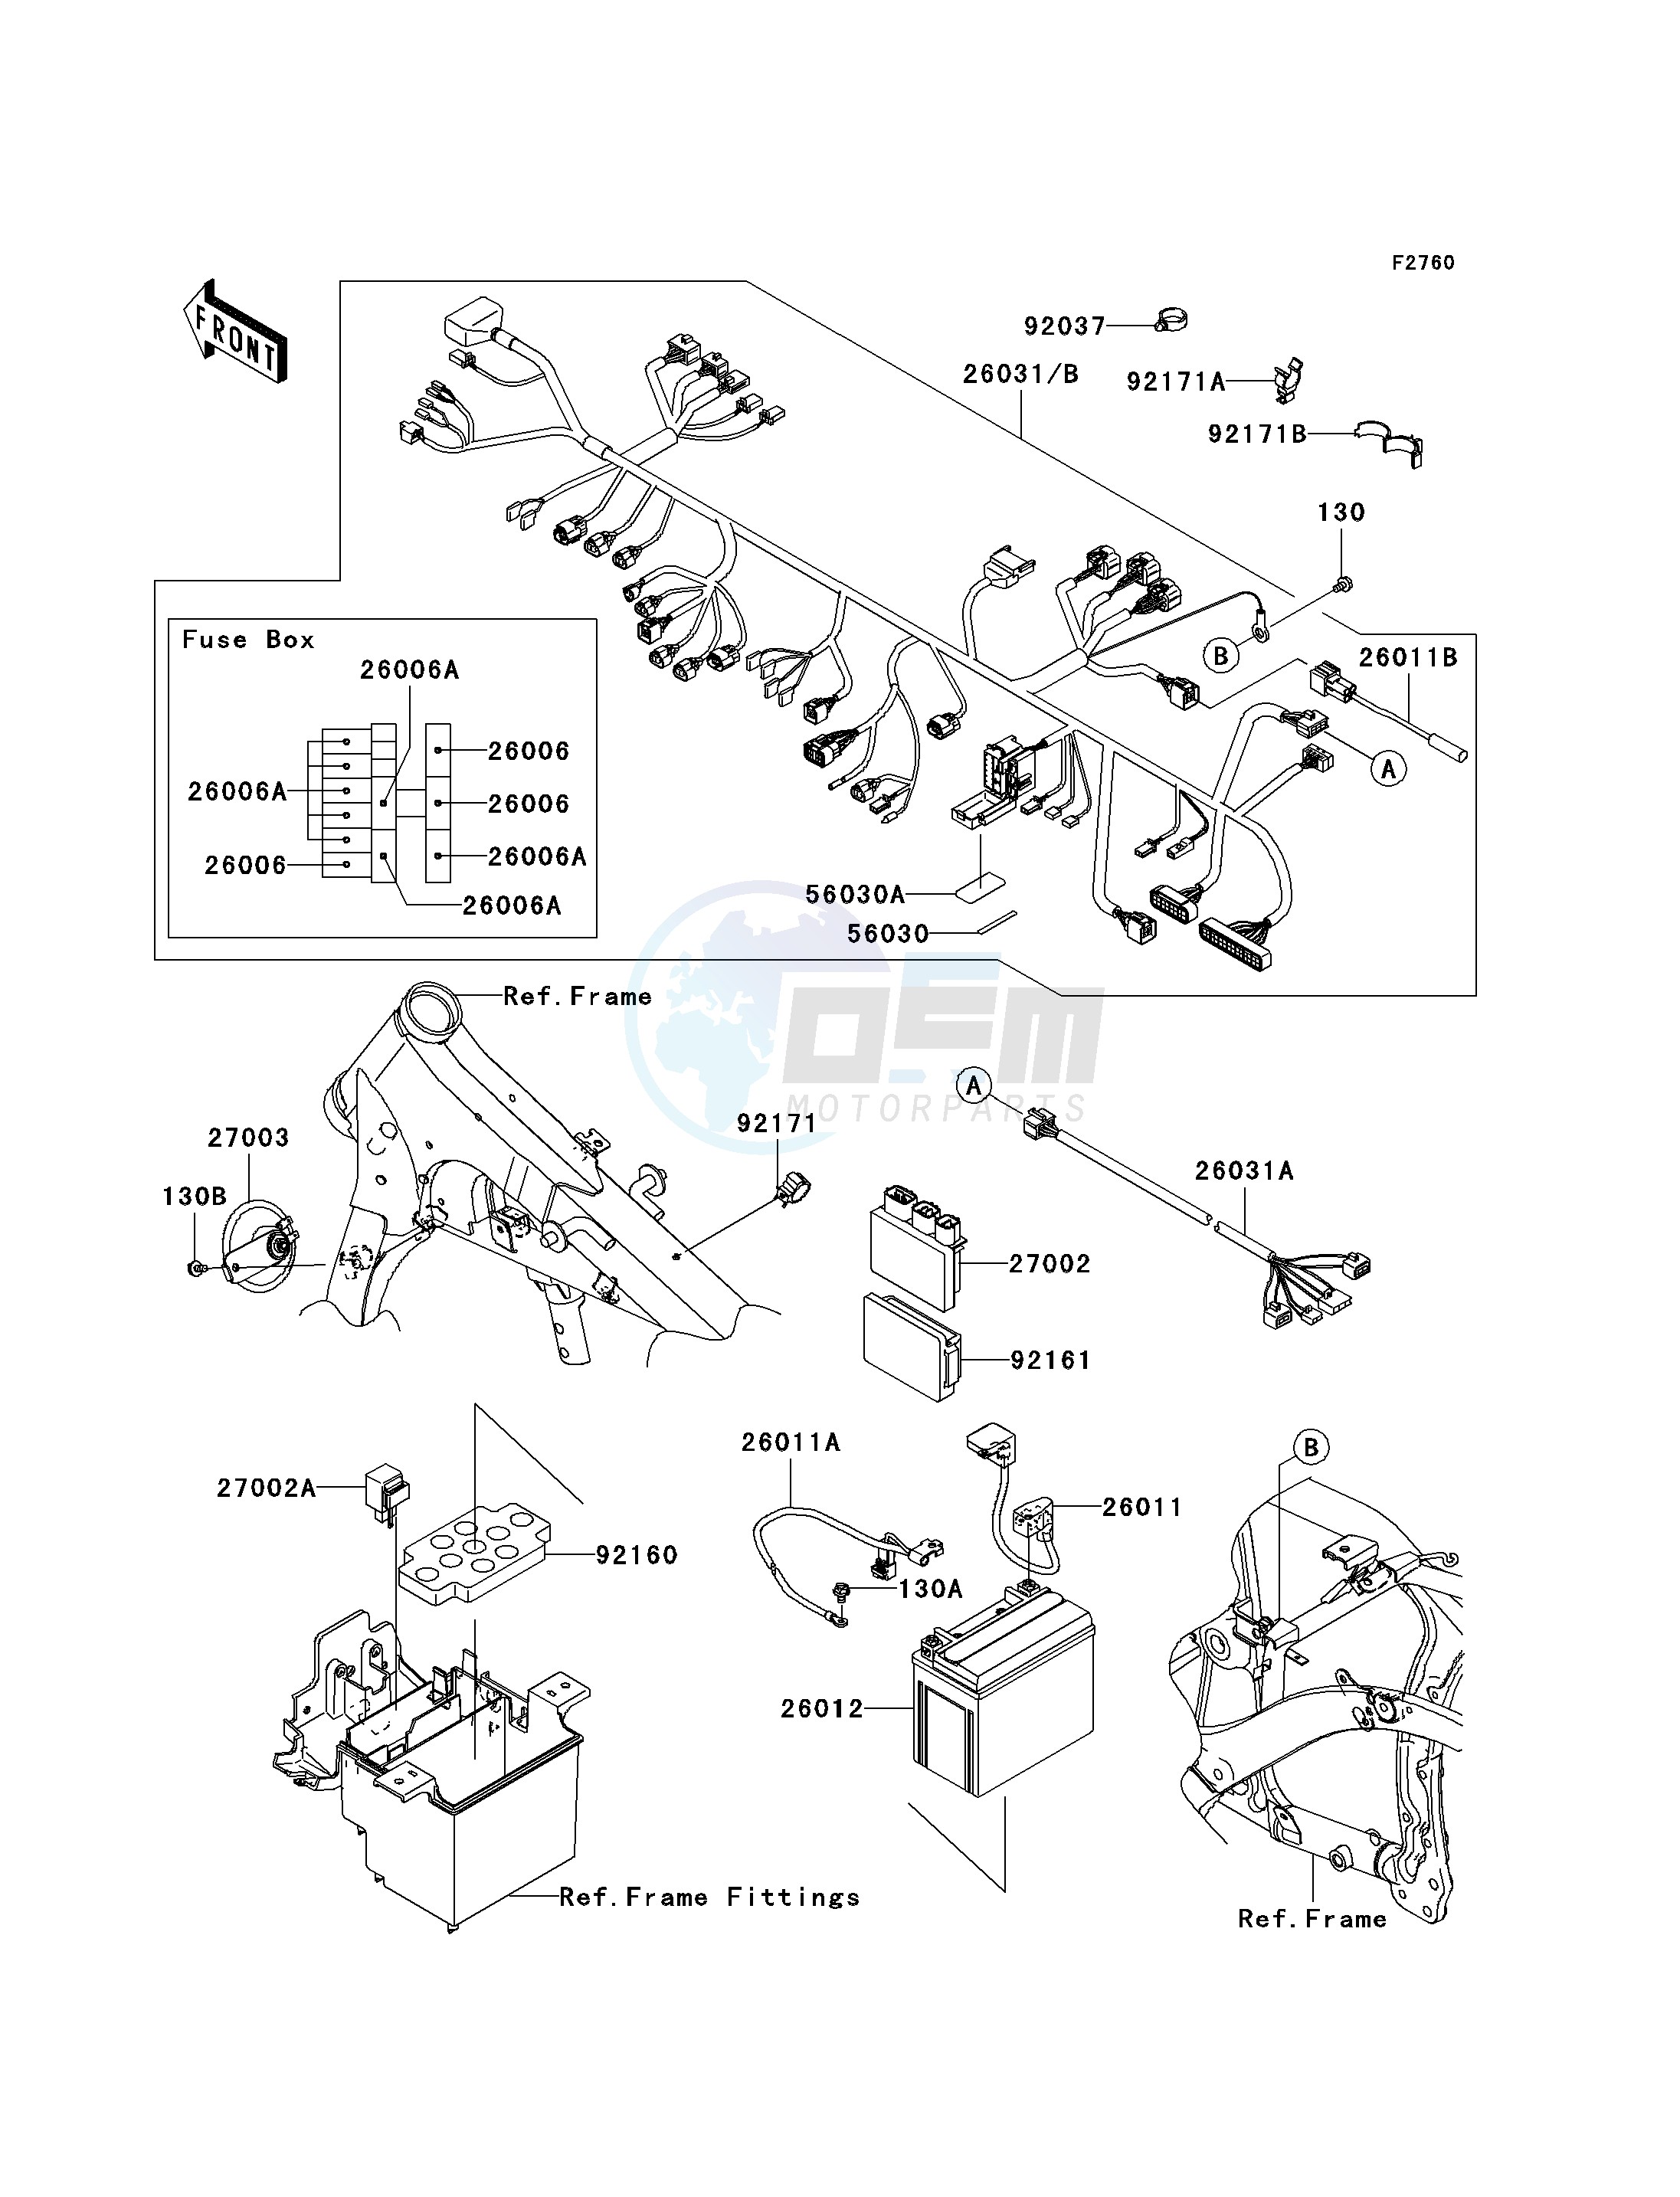 CHASSIS ELECTRICAL EQUIPMENT blueprint